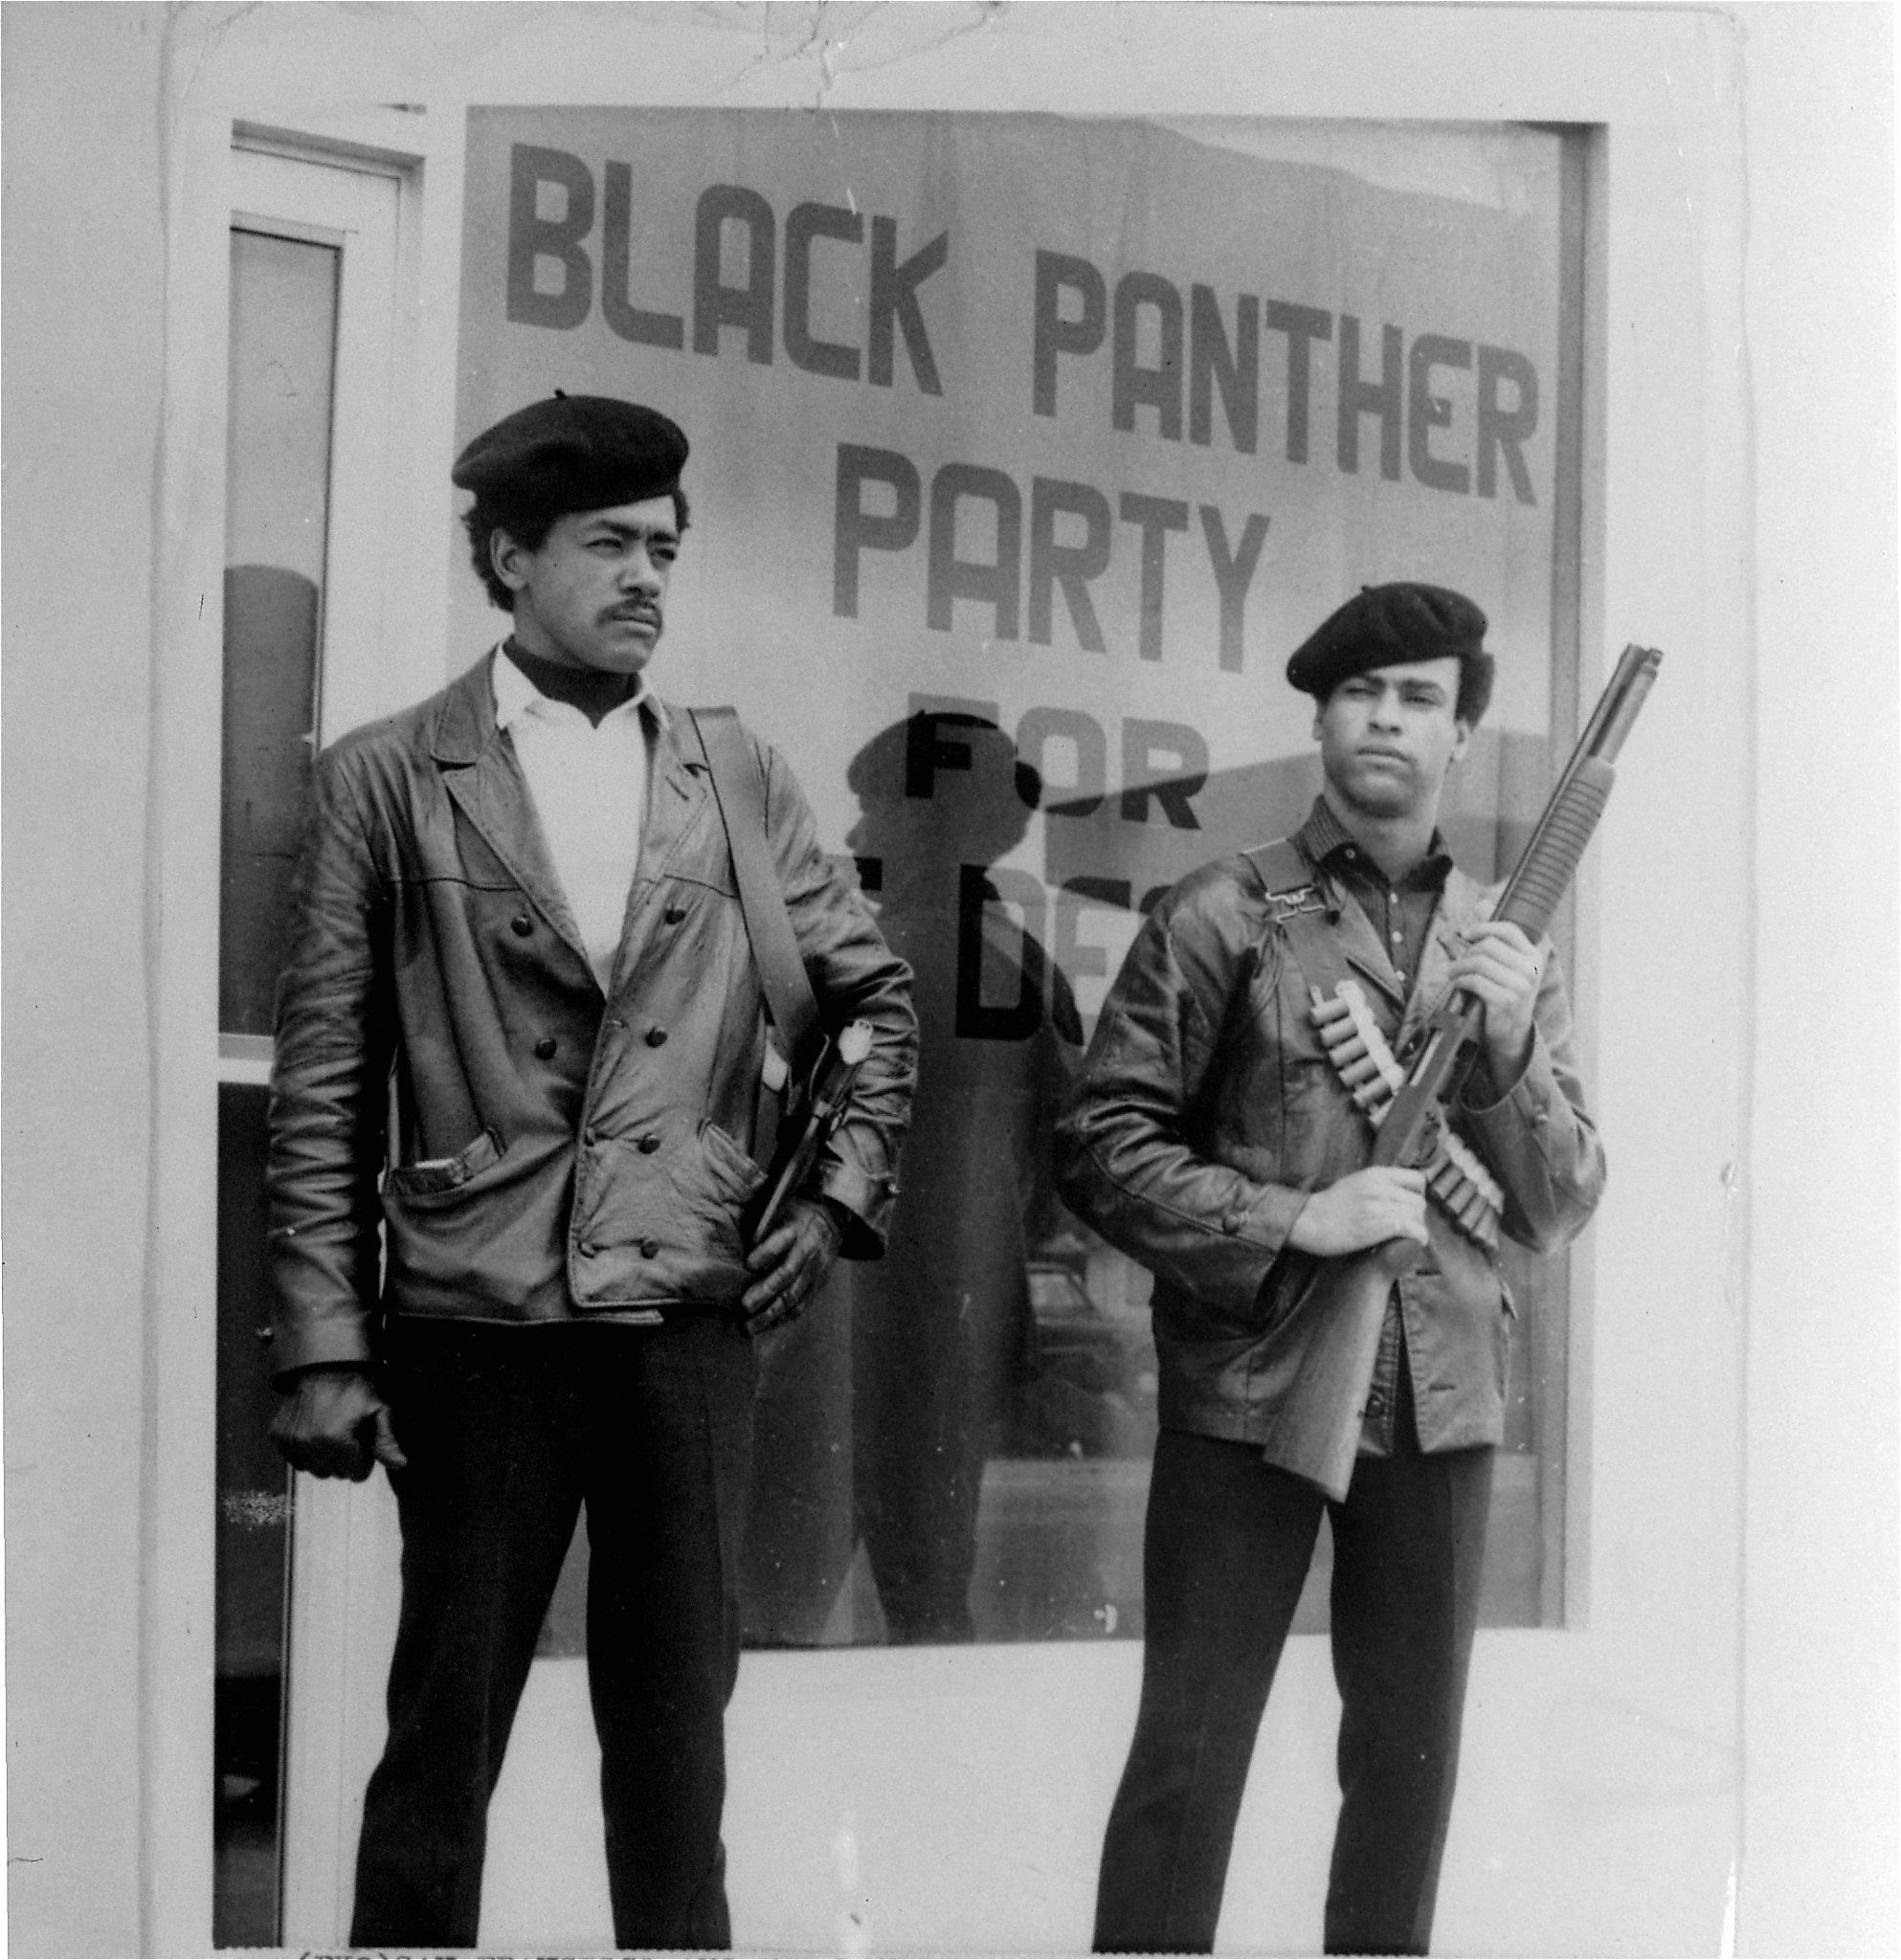 Rewriting History: Reworking the Black Panther Party’s Image